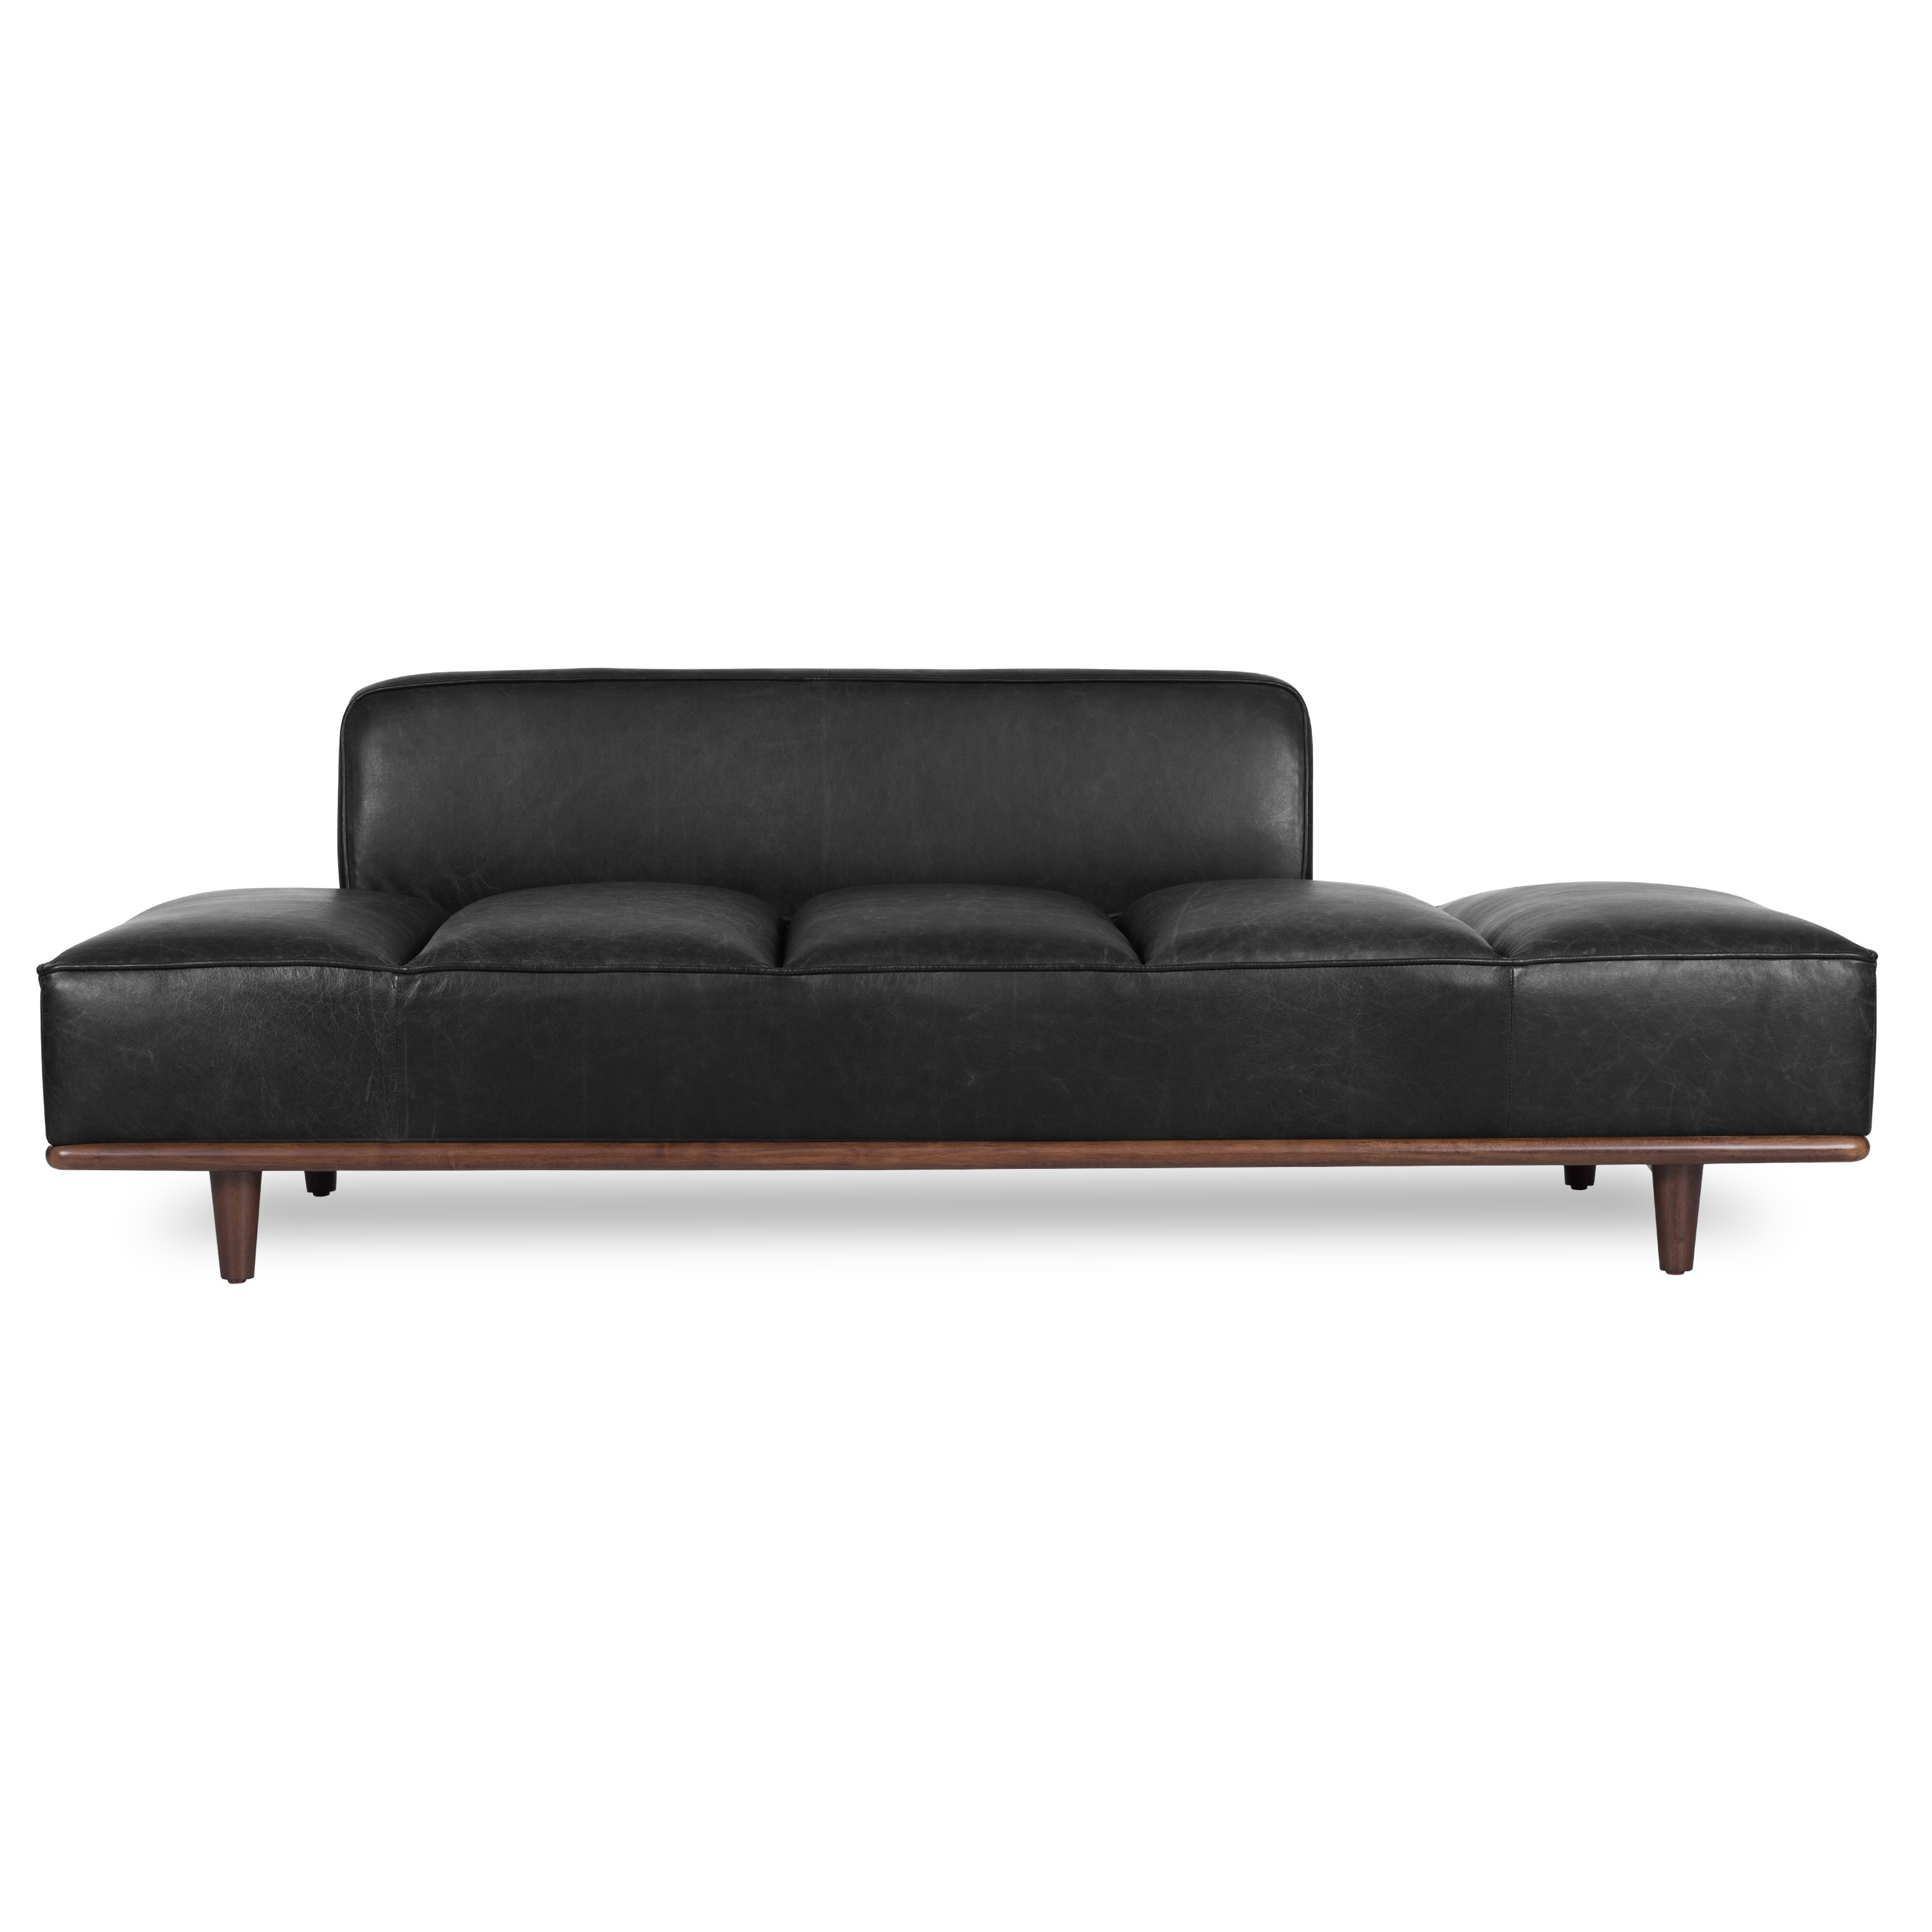 Poly And Bark Jasper Daybed - Genuine Italian Leather